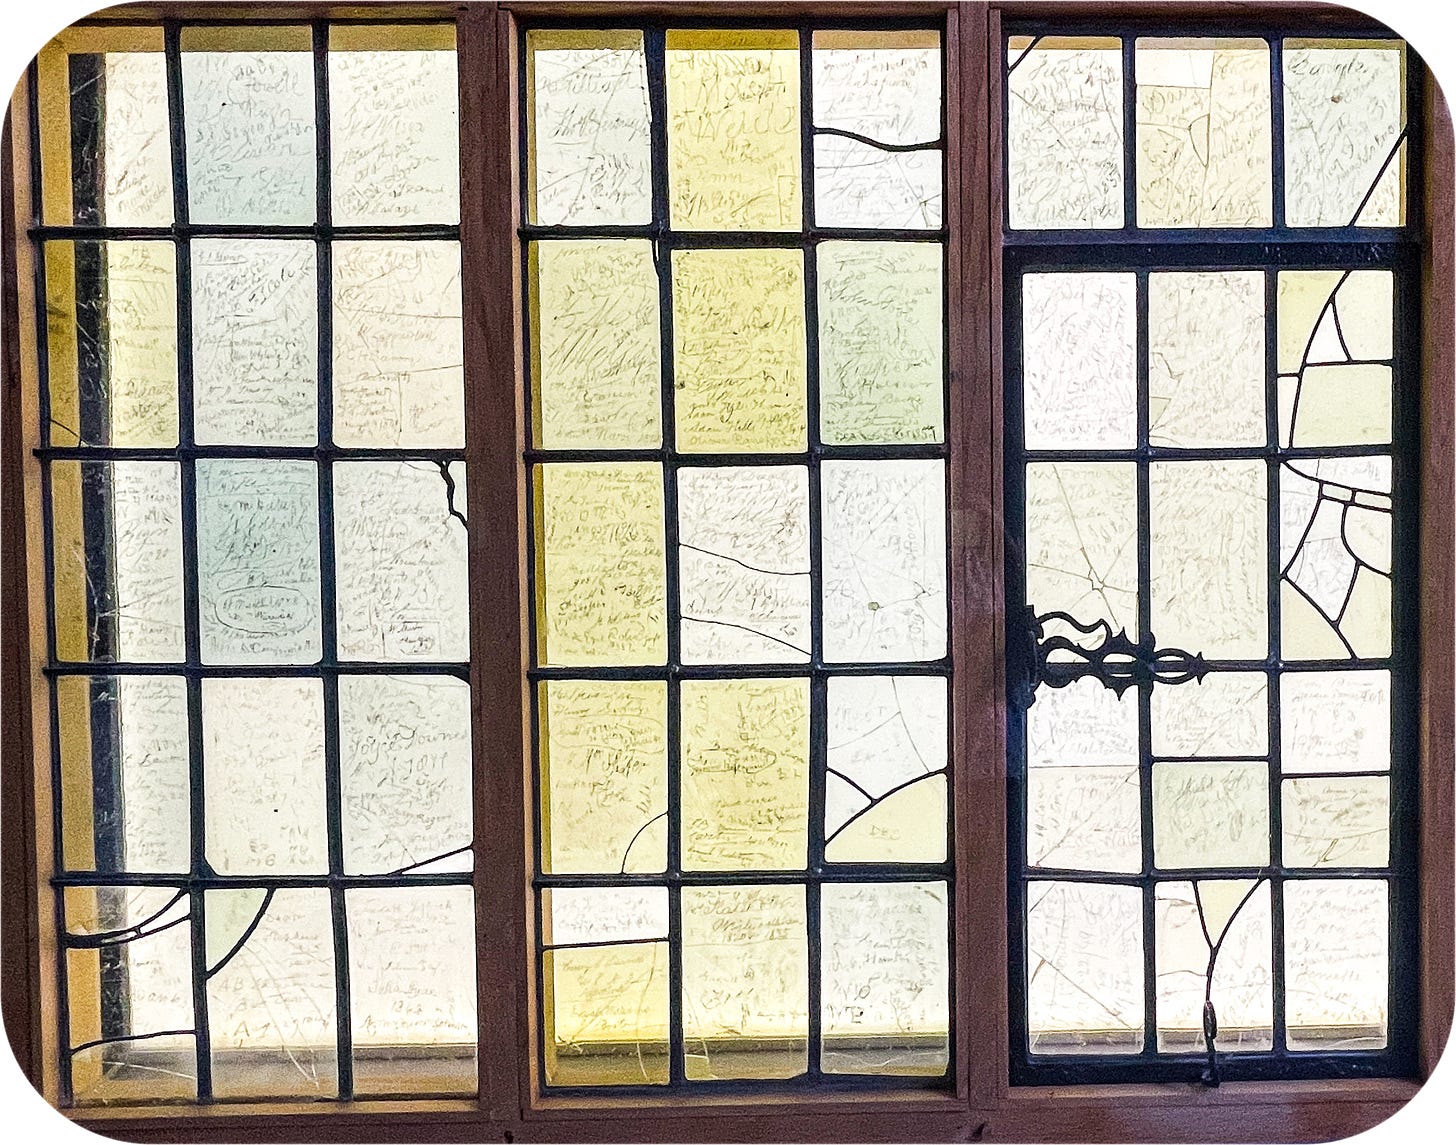 Etched names at Shakespeare's birthplace window